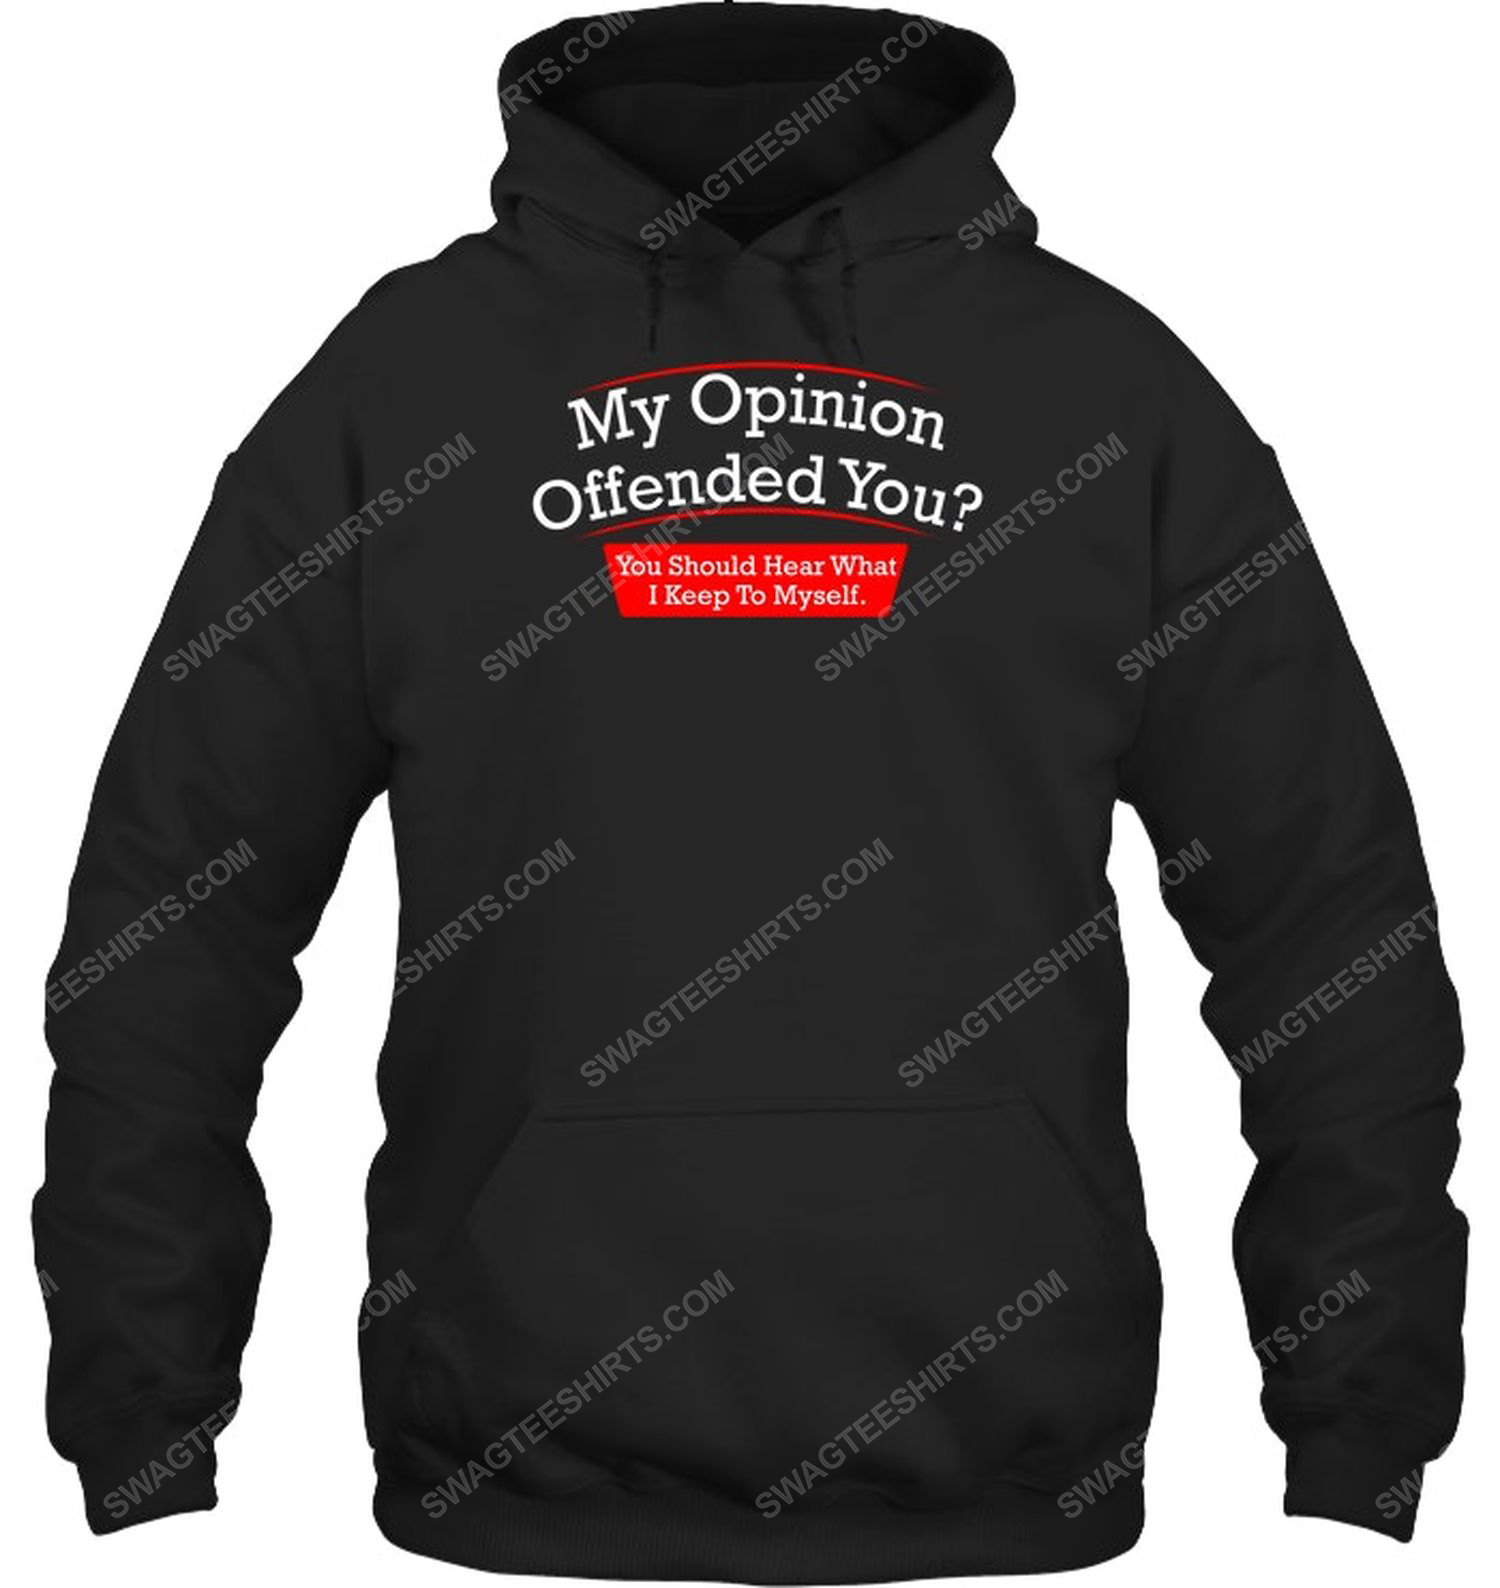 My opinion offended you you should hear what i keep to myself political hoodie